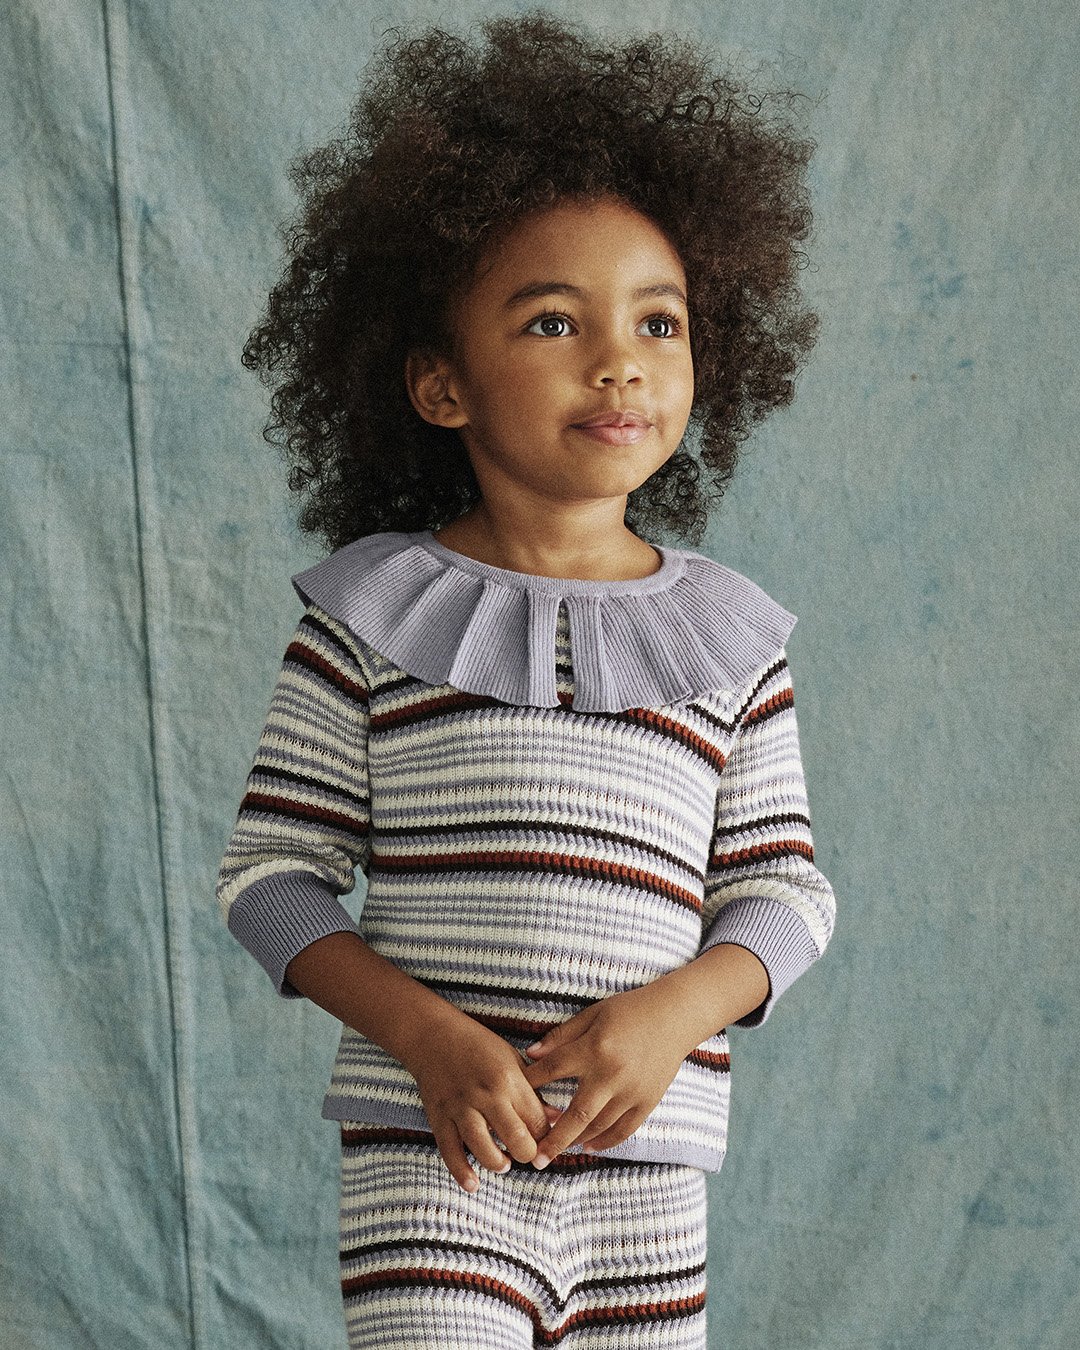 Multi-color textured stripe styles in a light Pima cotton knit, with fun ruffle details and versatile collars that layer exquisitely and adds flare to any outfit. Available in Pewter Stripe and Poppy Stripe.